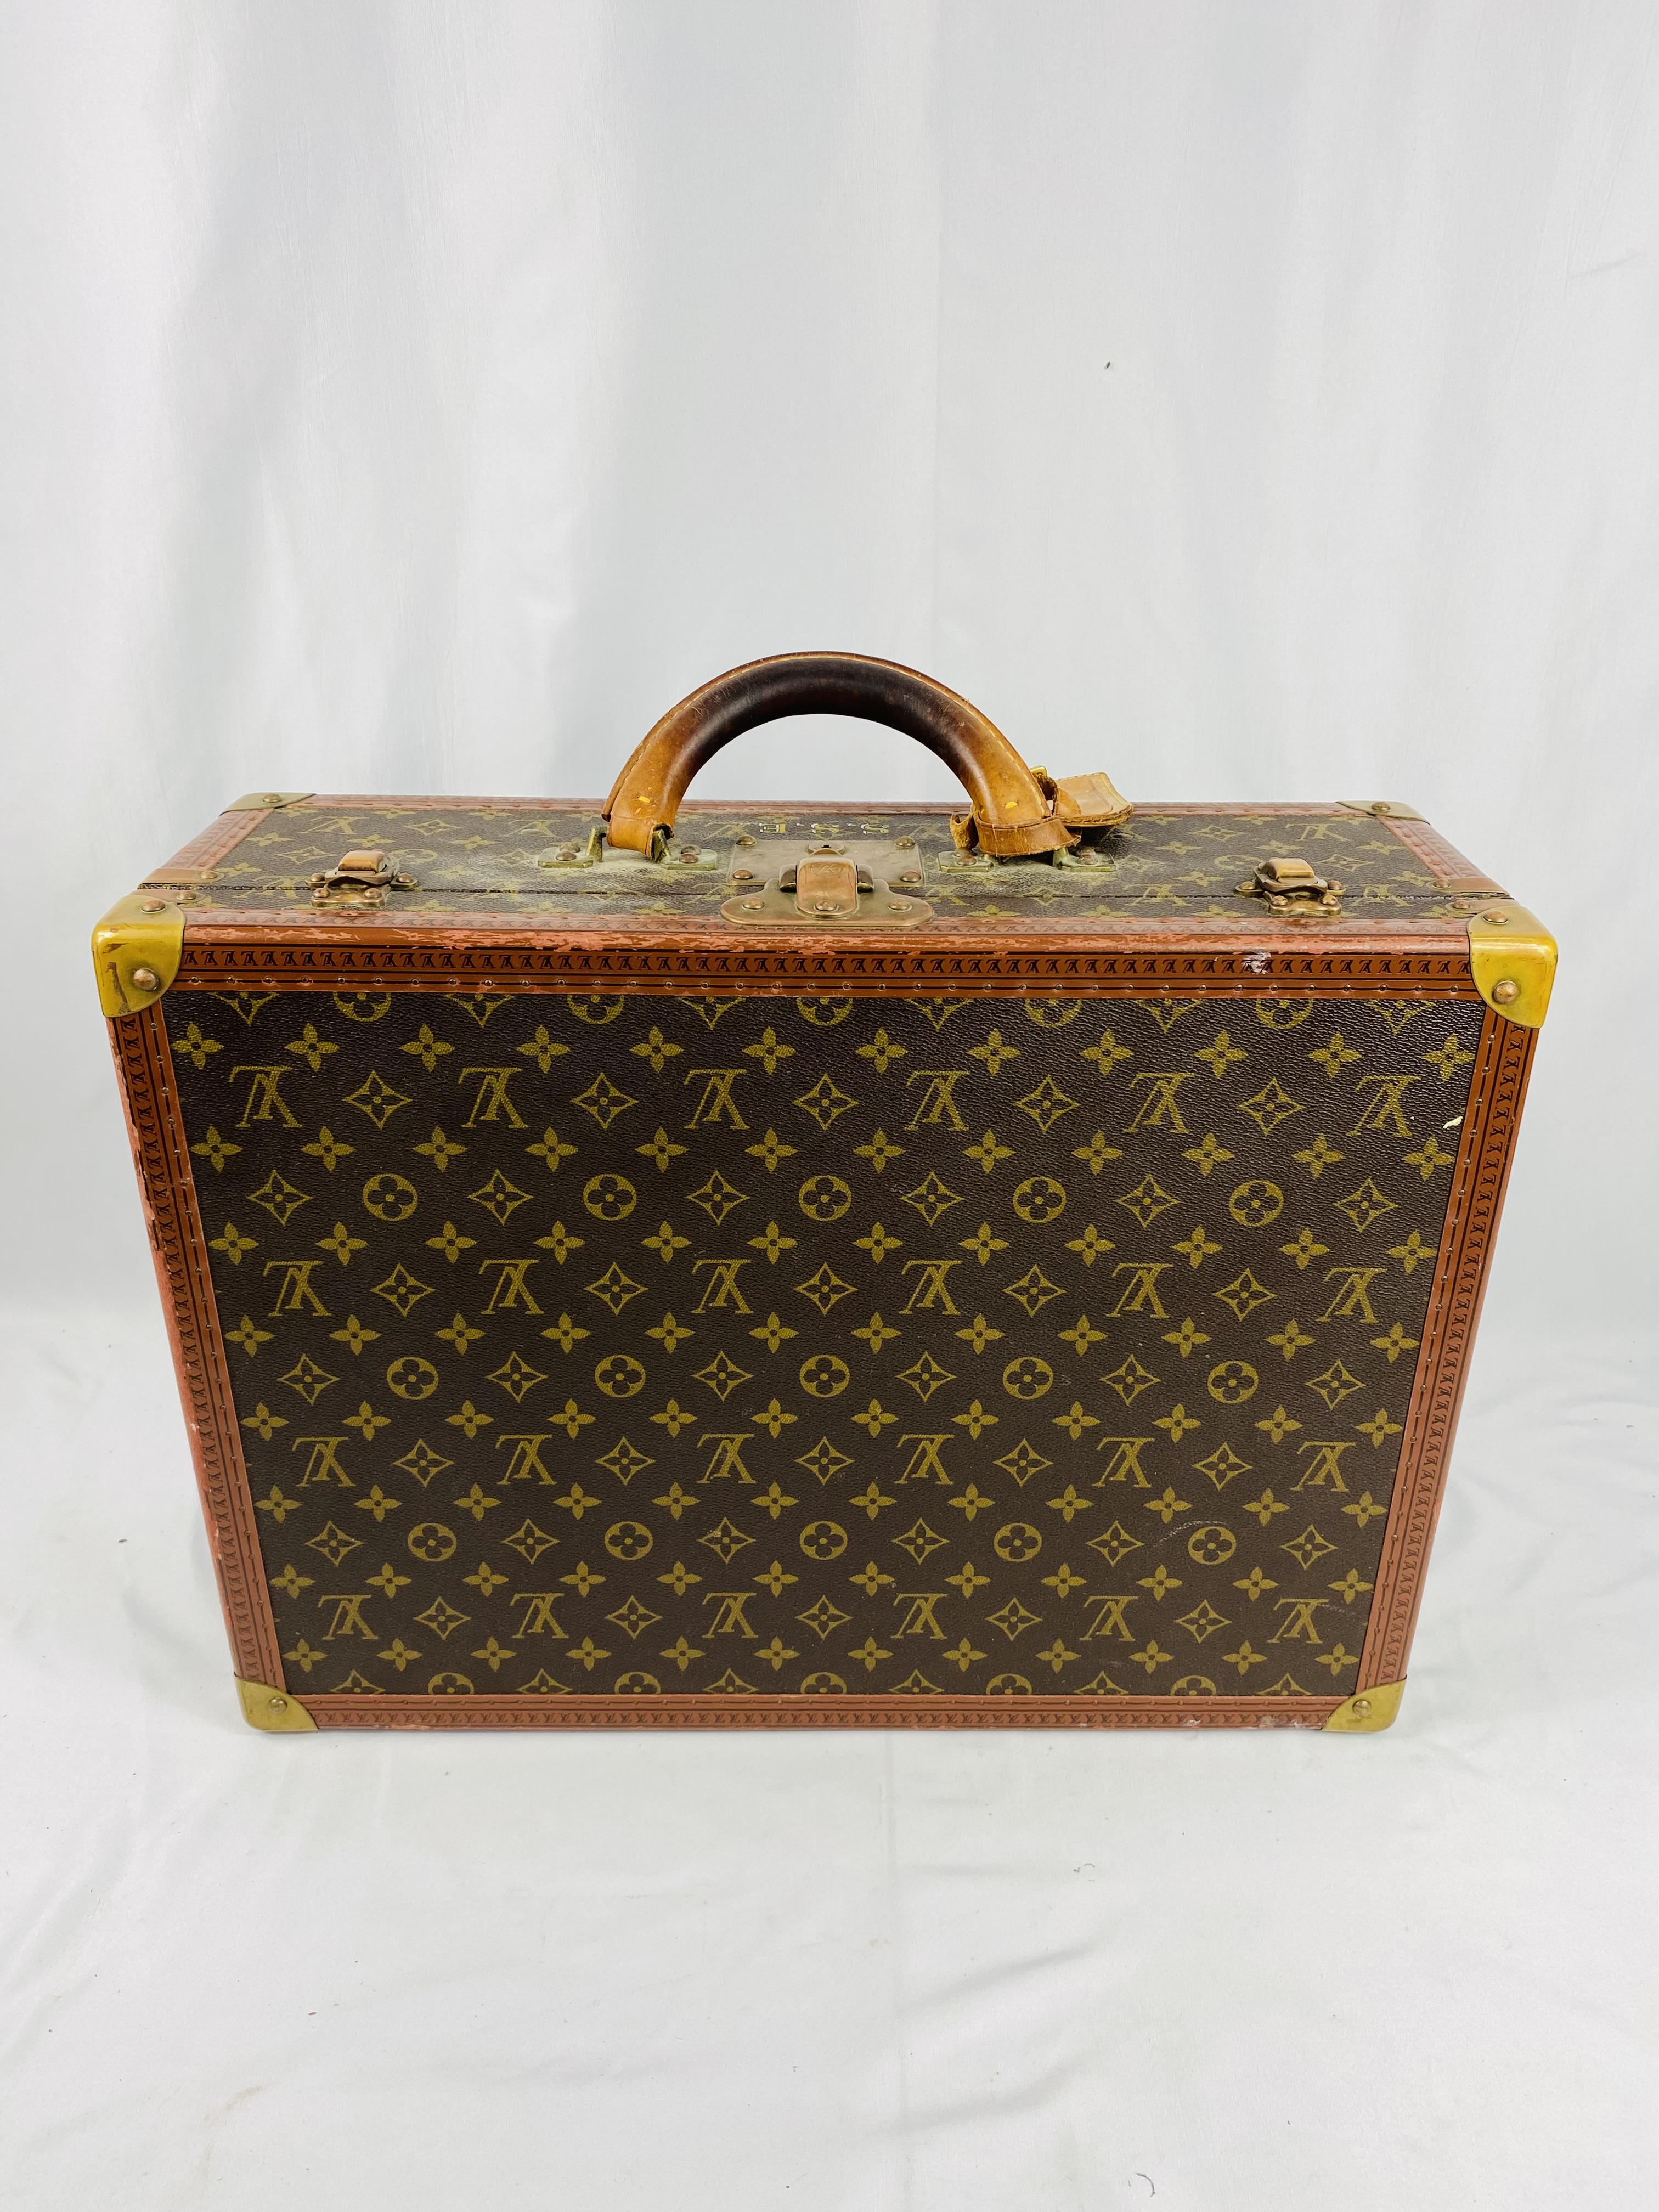 Louis Vuitton suitcase with protective cover - Image 8 of 10